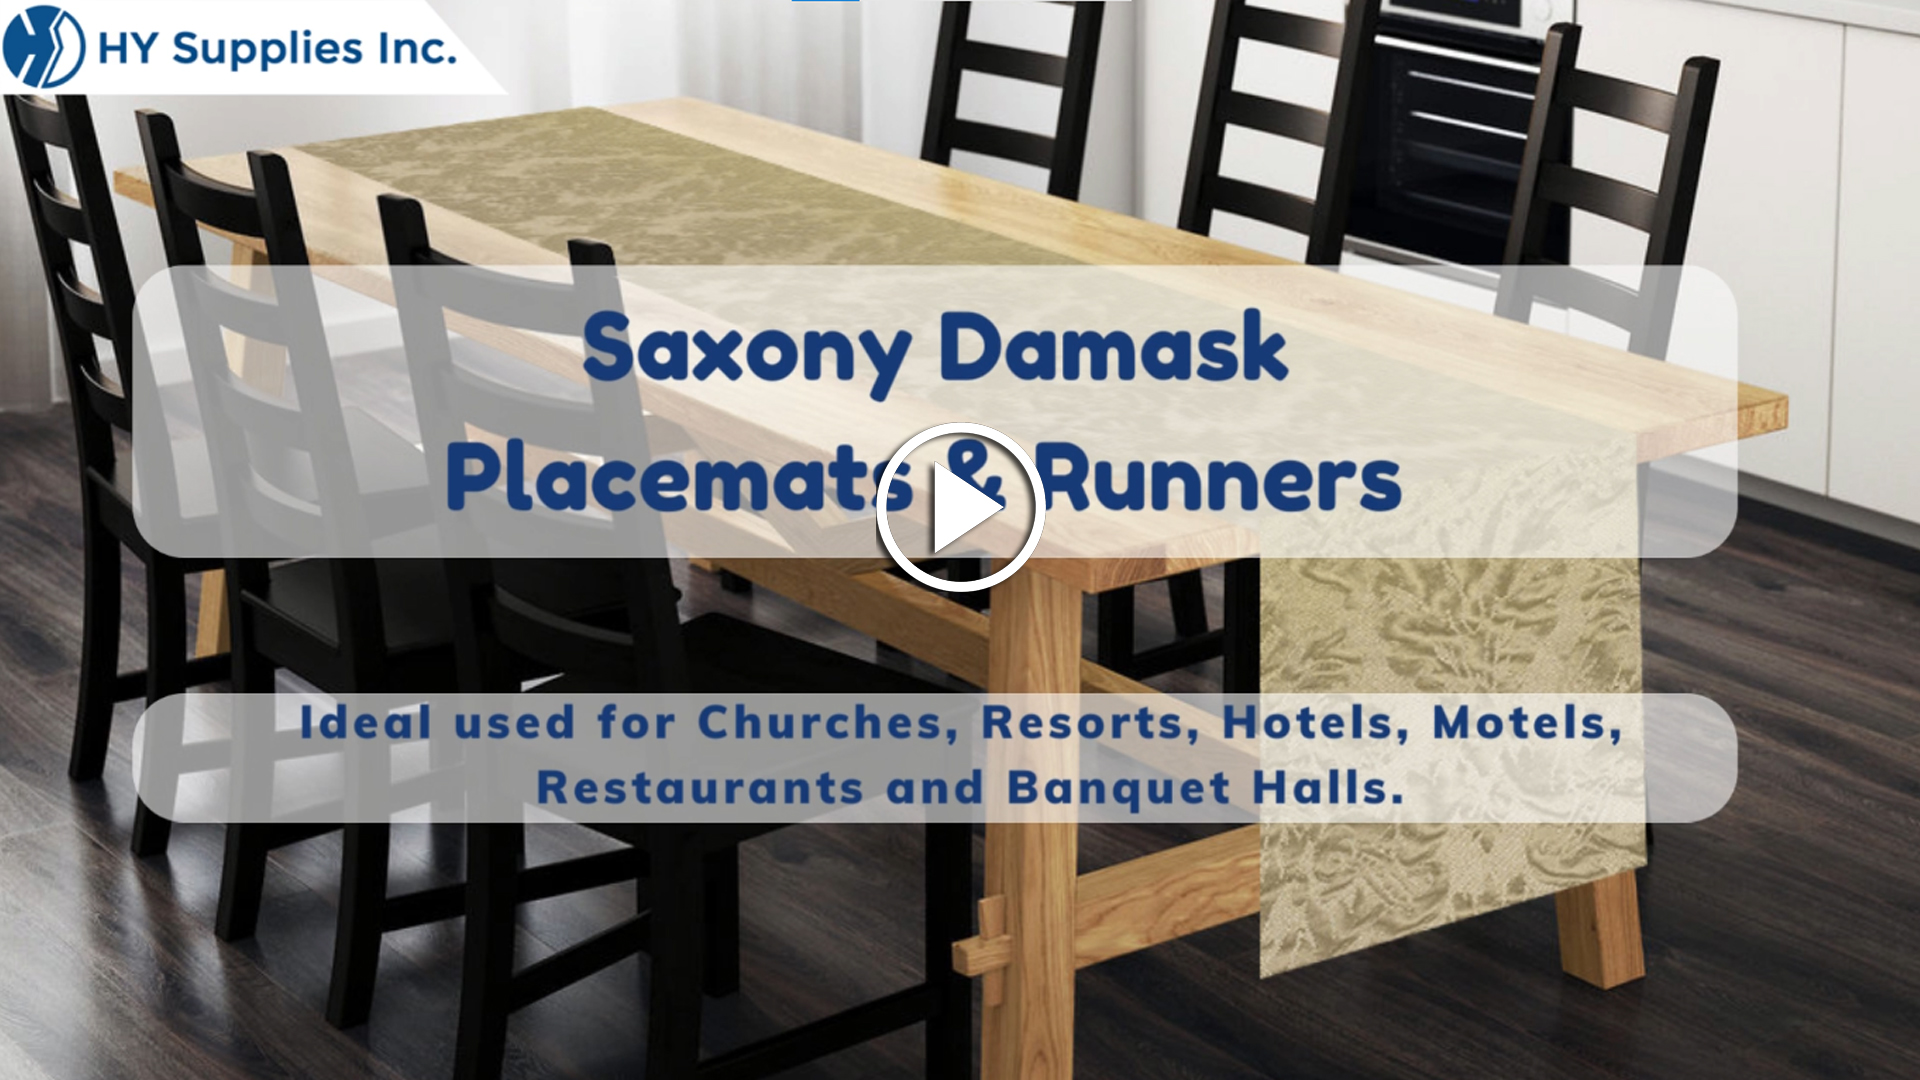 Saxony Damask Placemats & Runners 